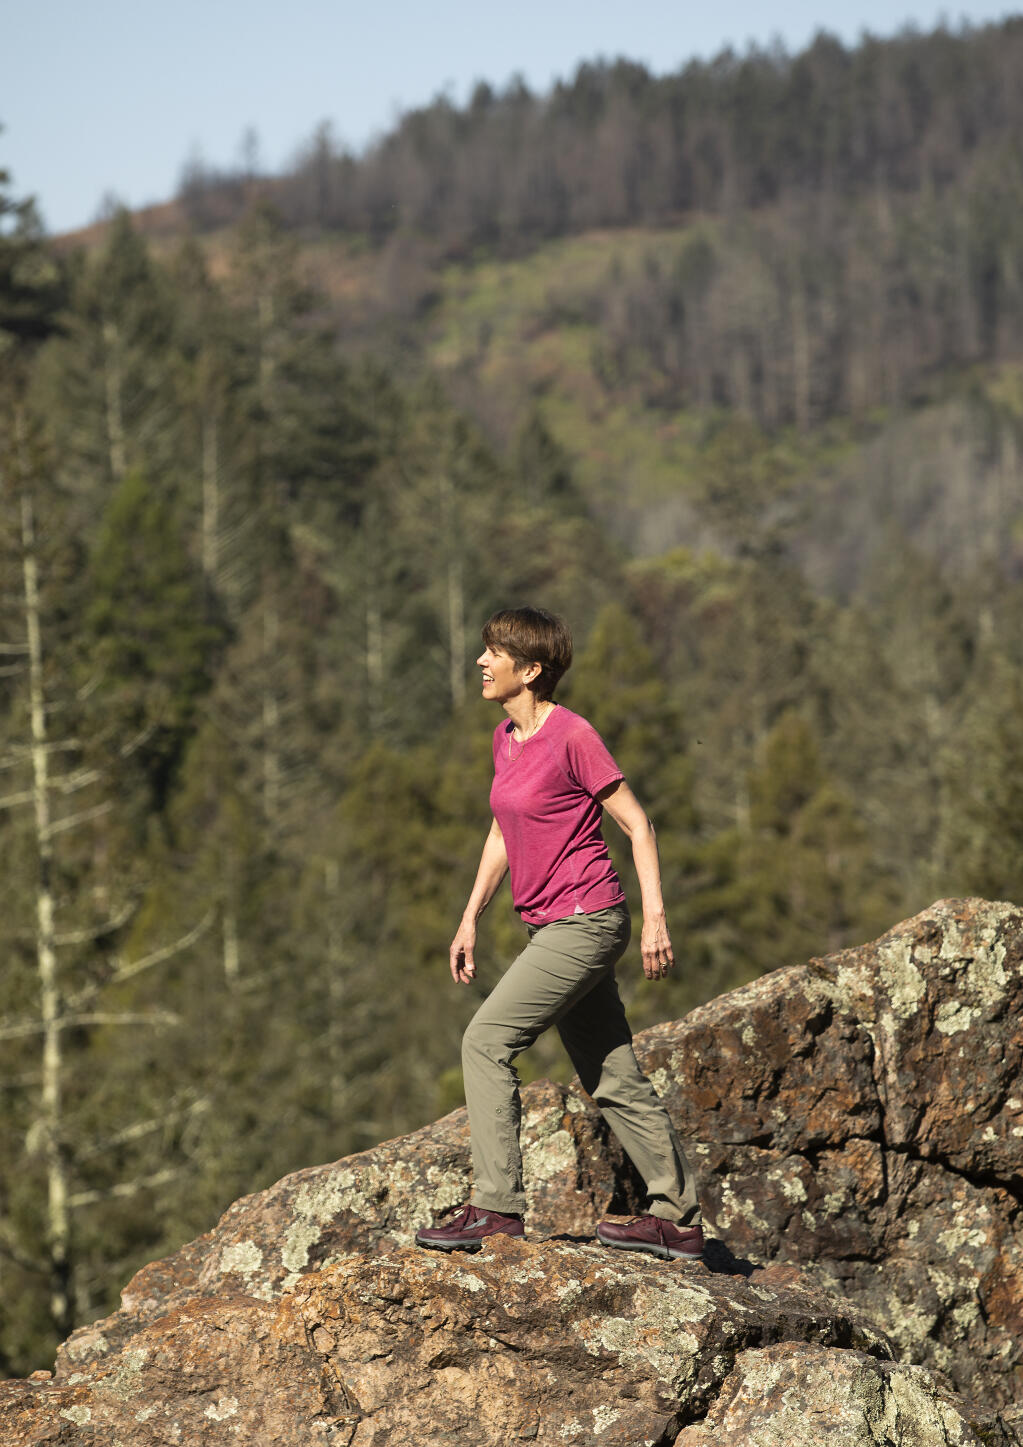 Inga Aksamit of Kenwood has traveled the world and most of California in search of great walks like Sugarloaf State Park on Friday, April 2, 2021.   (John Burgess / The Press Democrat)